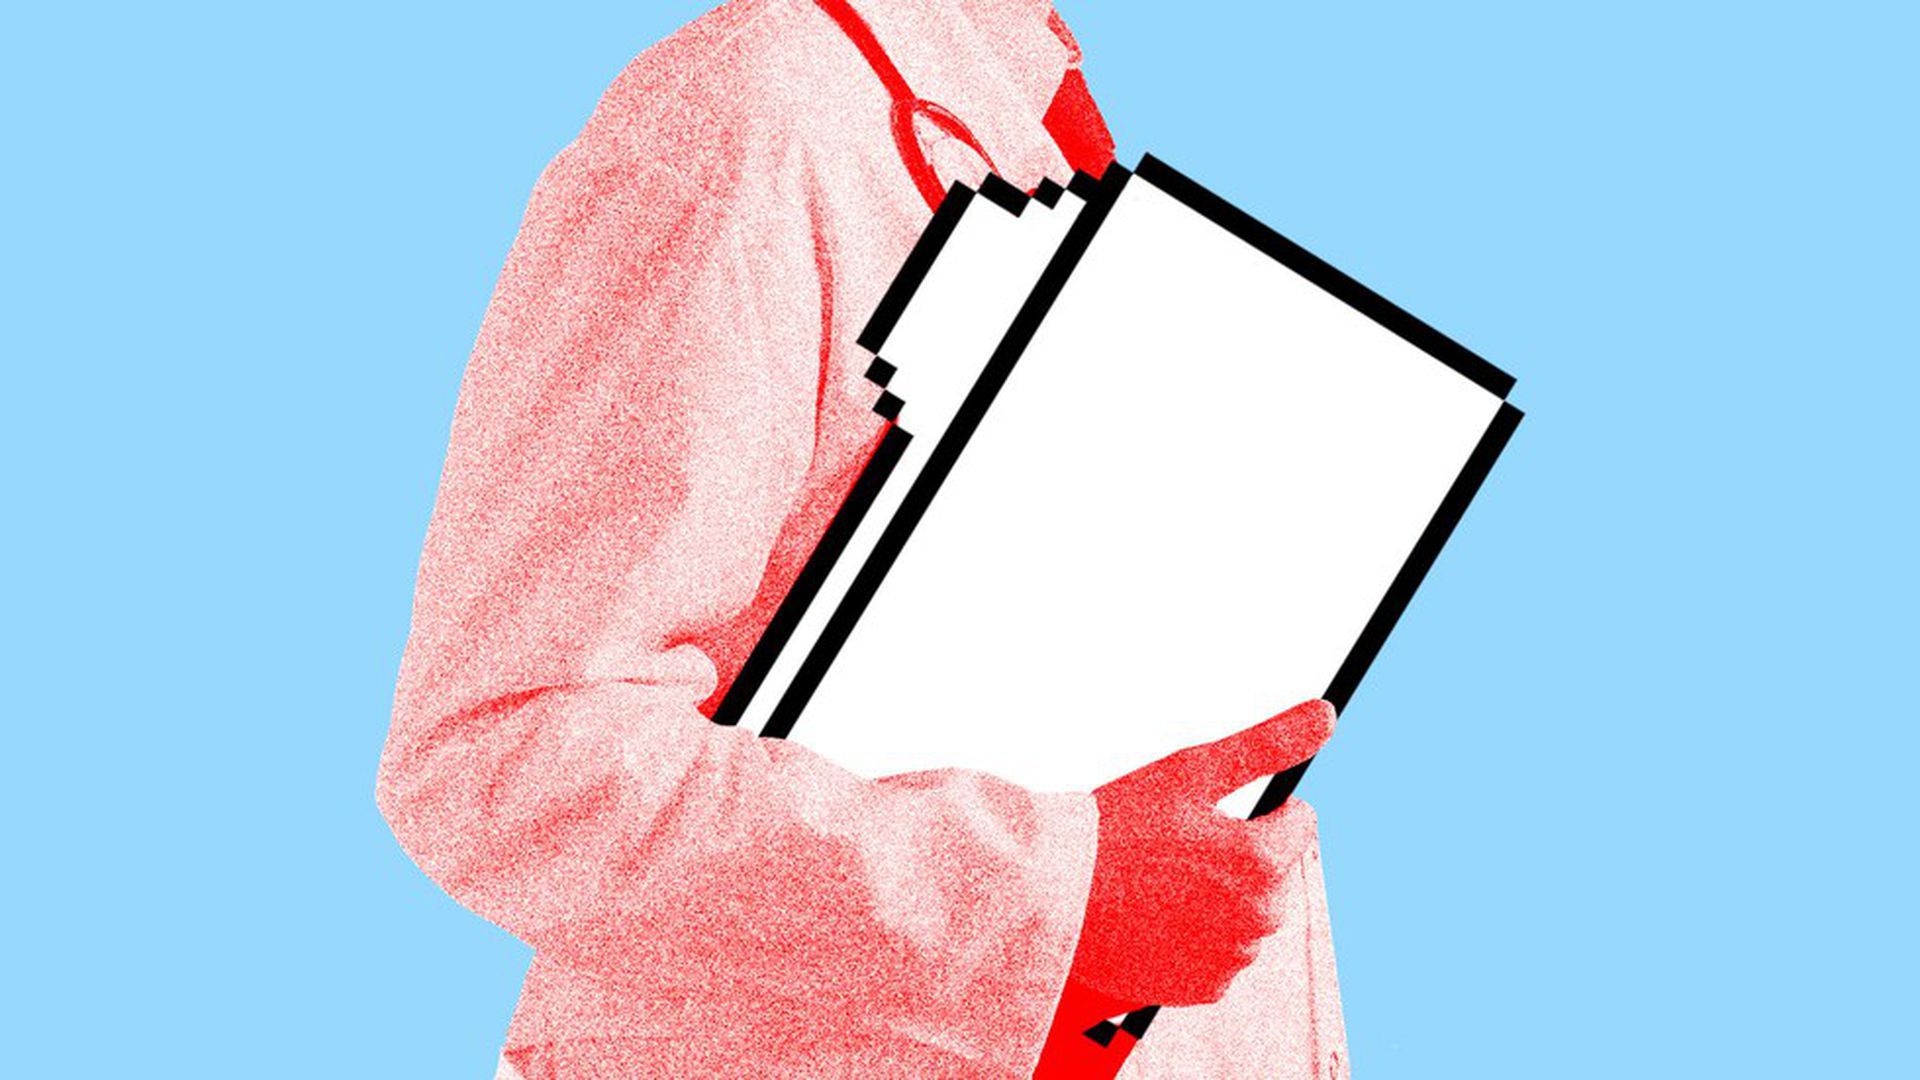 Illustration of a doctor carrying a file folder icon